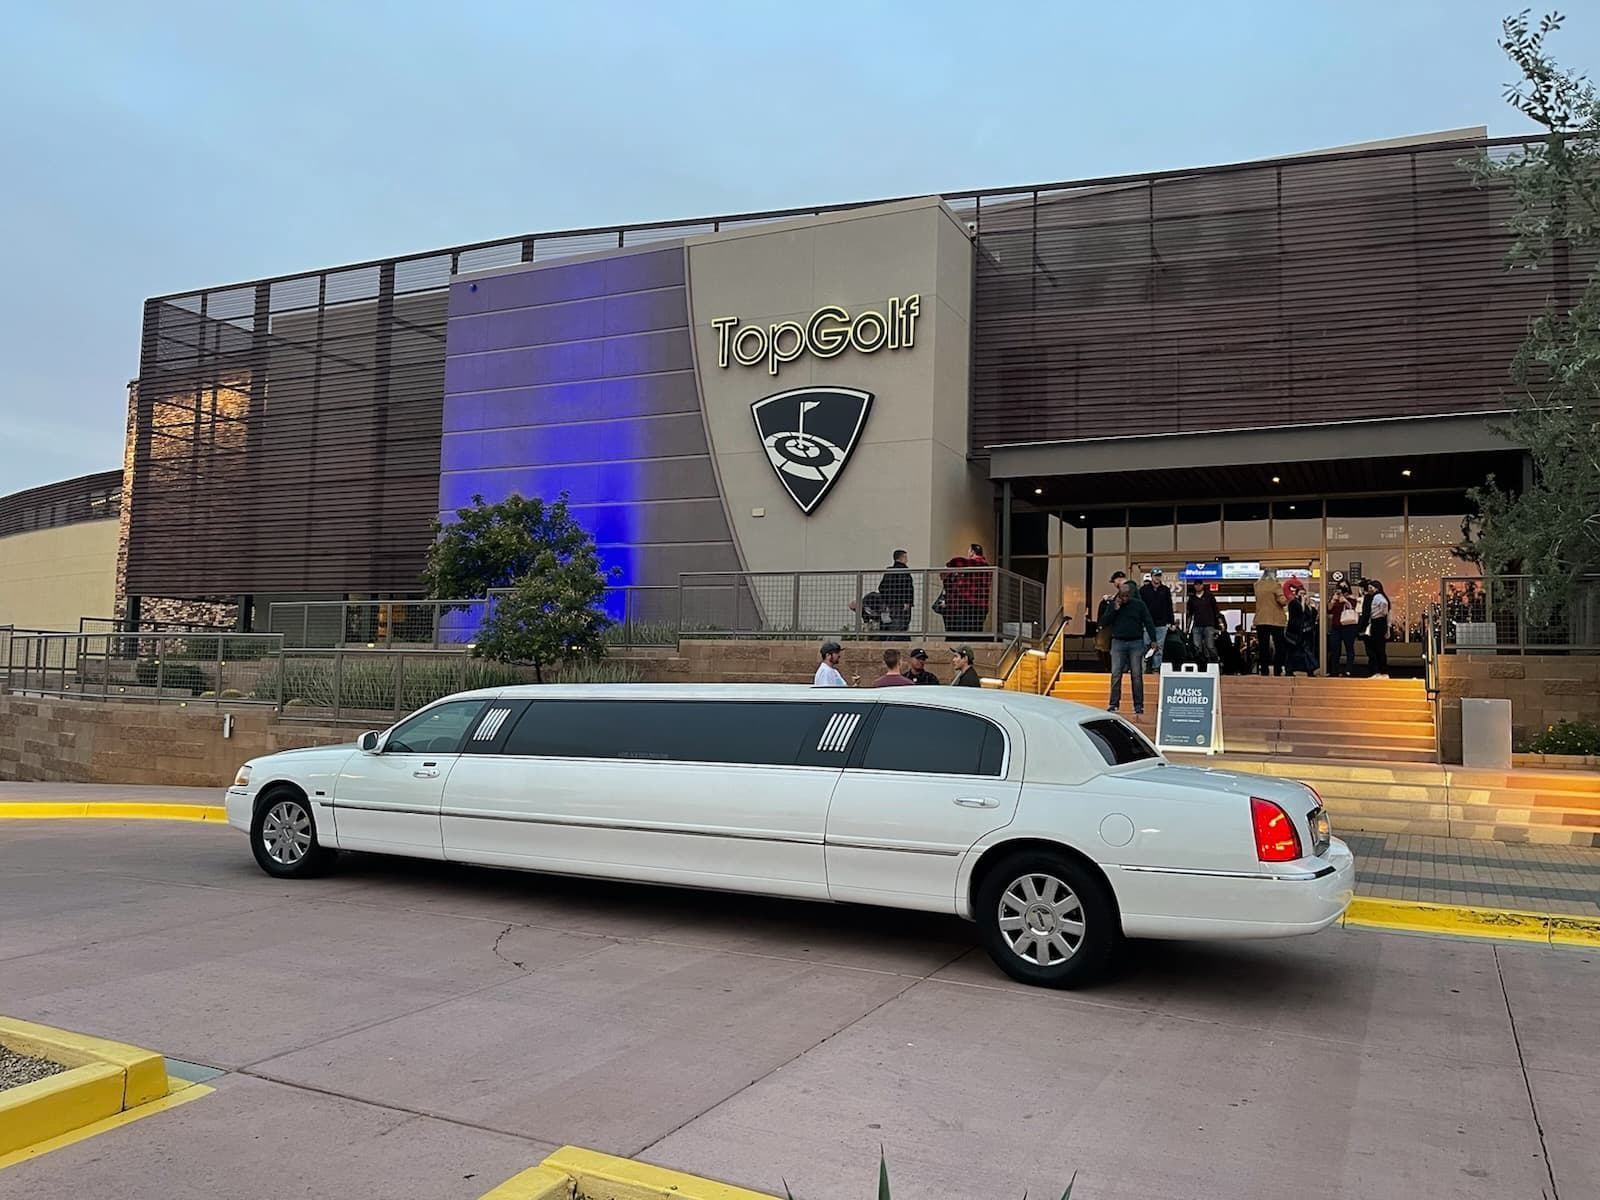 10 Things To Do With A Limo In Scottsdale, AZ